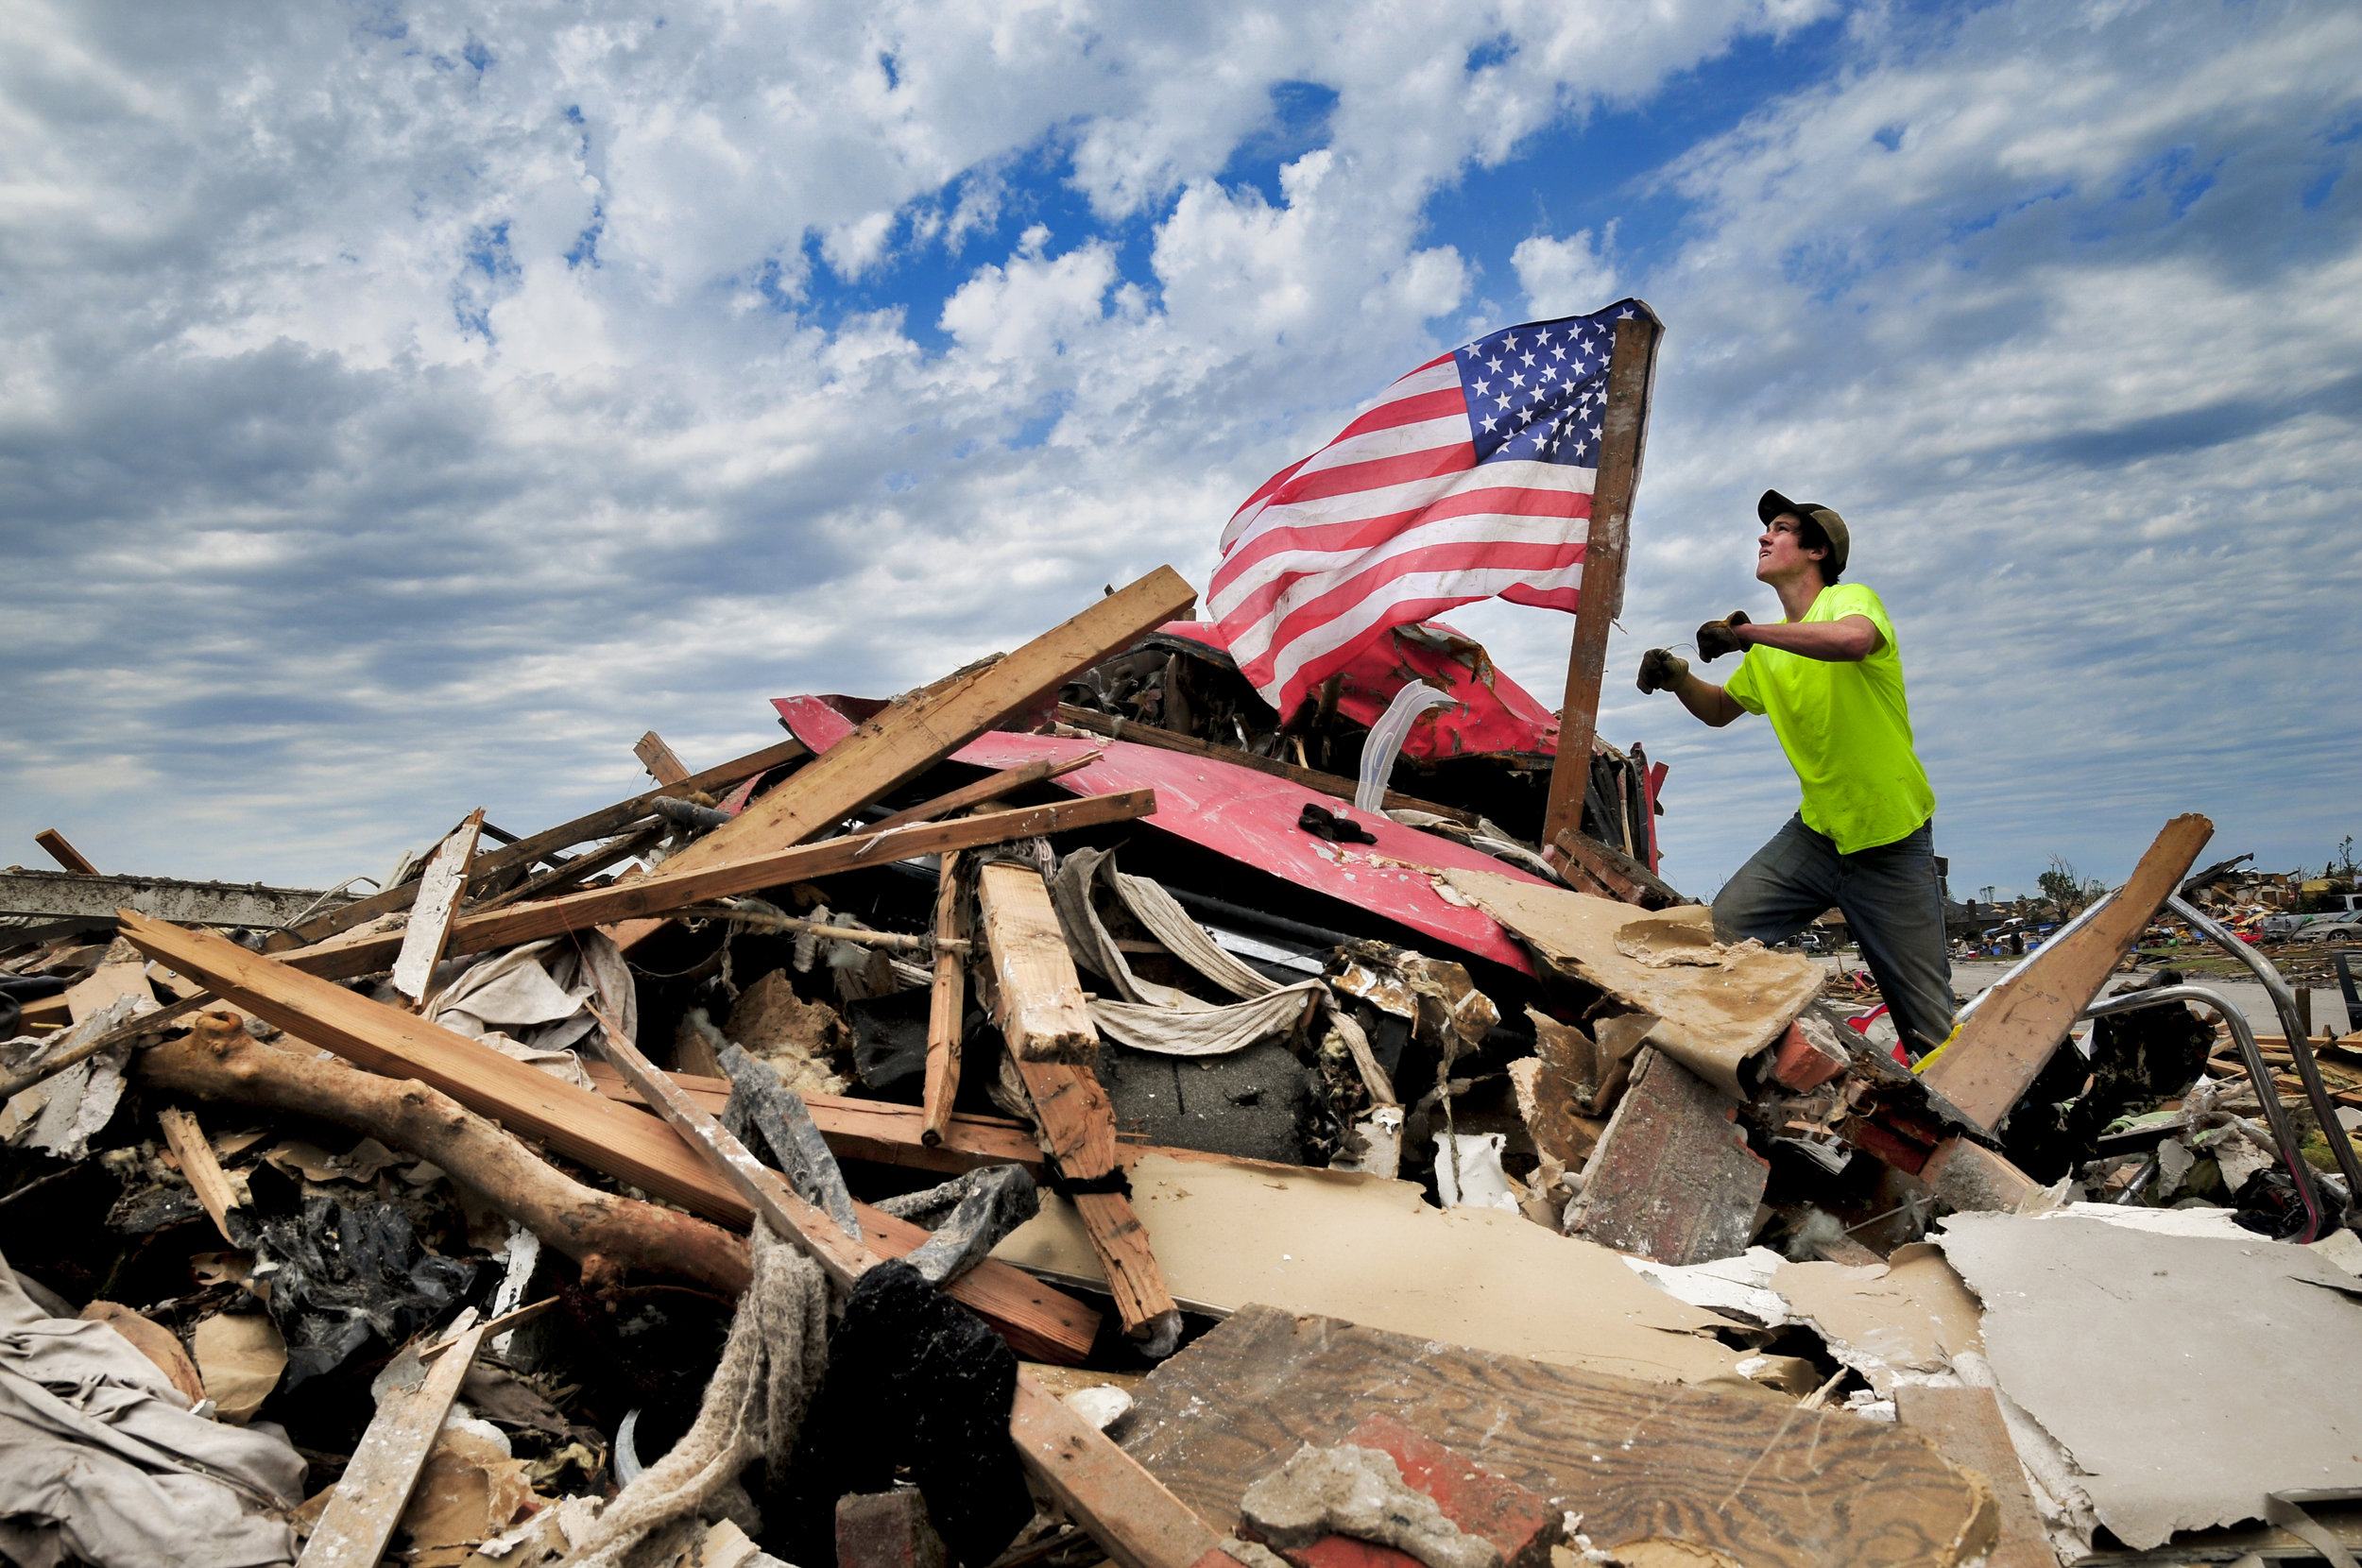  Franklin Van Beckum, a volunteer from Edmond, hangs a flag that he found amid the destruction on Thursday, May 23 in Moore OK.

PHOTO SENT ON SPEC 